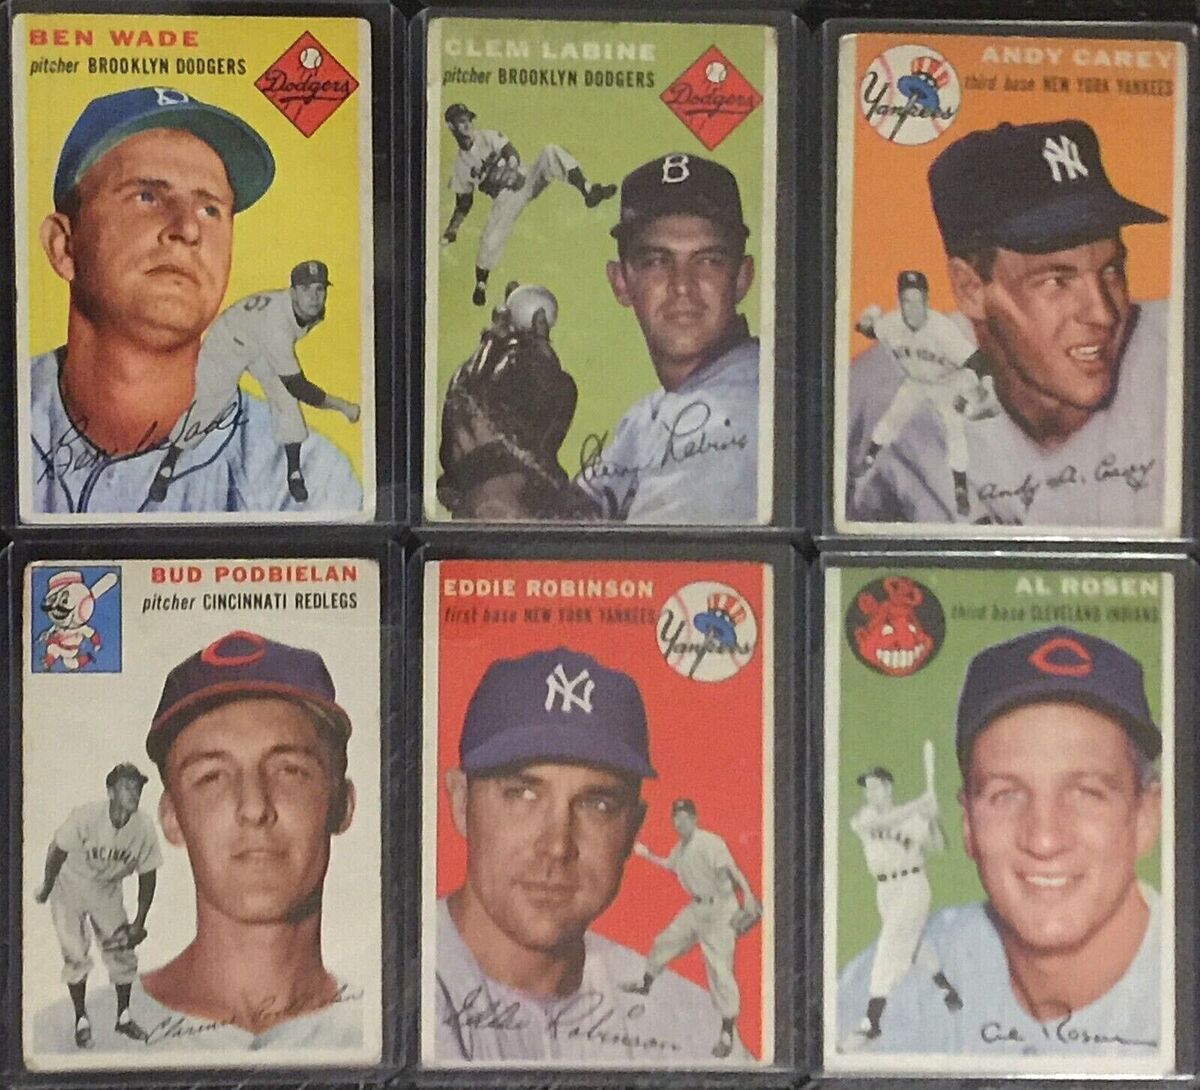 1954 TOPPS BASEBALL CARD SINGLES COMPLETE YOUR SET PICK CHOOSE - Helia Beer  Co